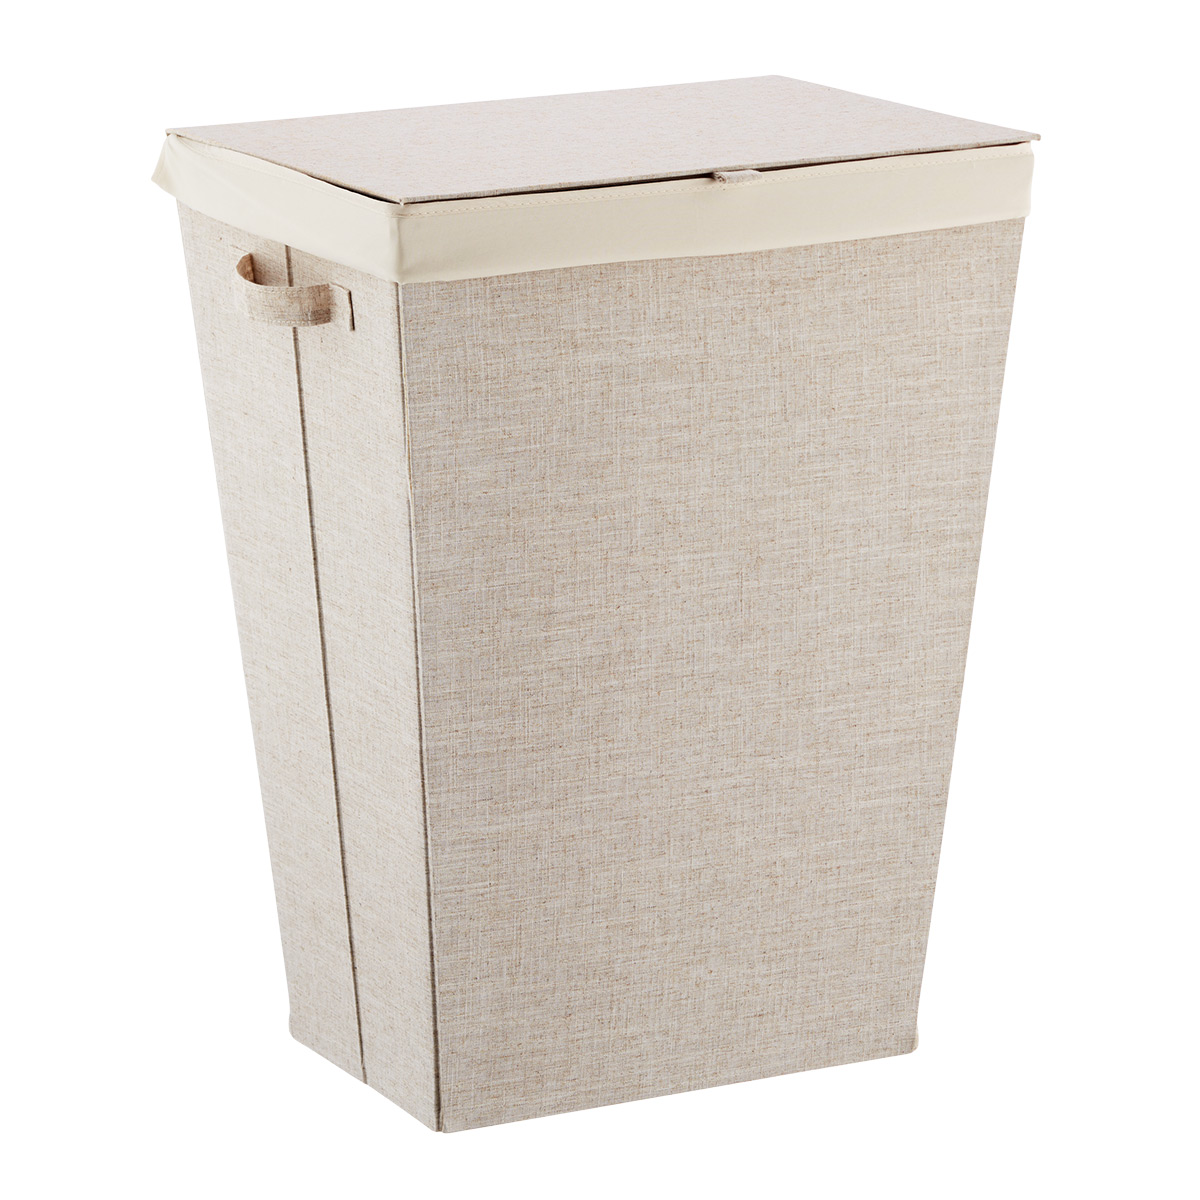 Cambridge Tapered Laundry Hamper | The Container Store